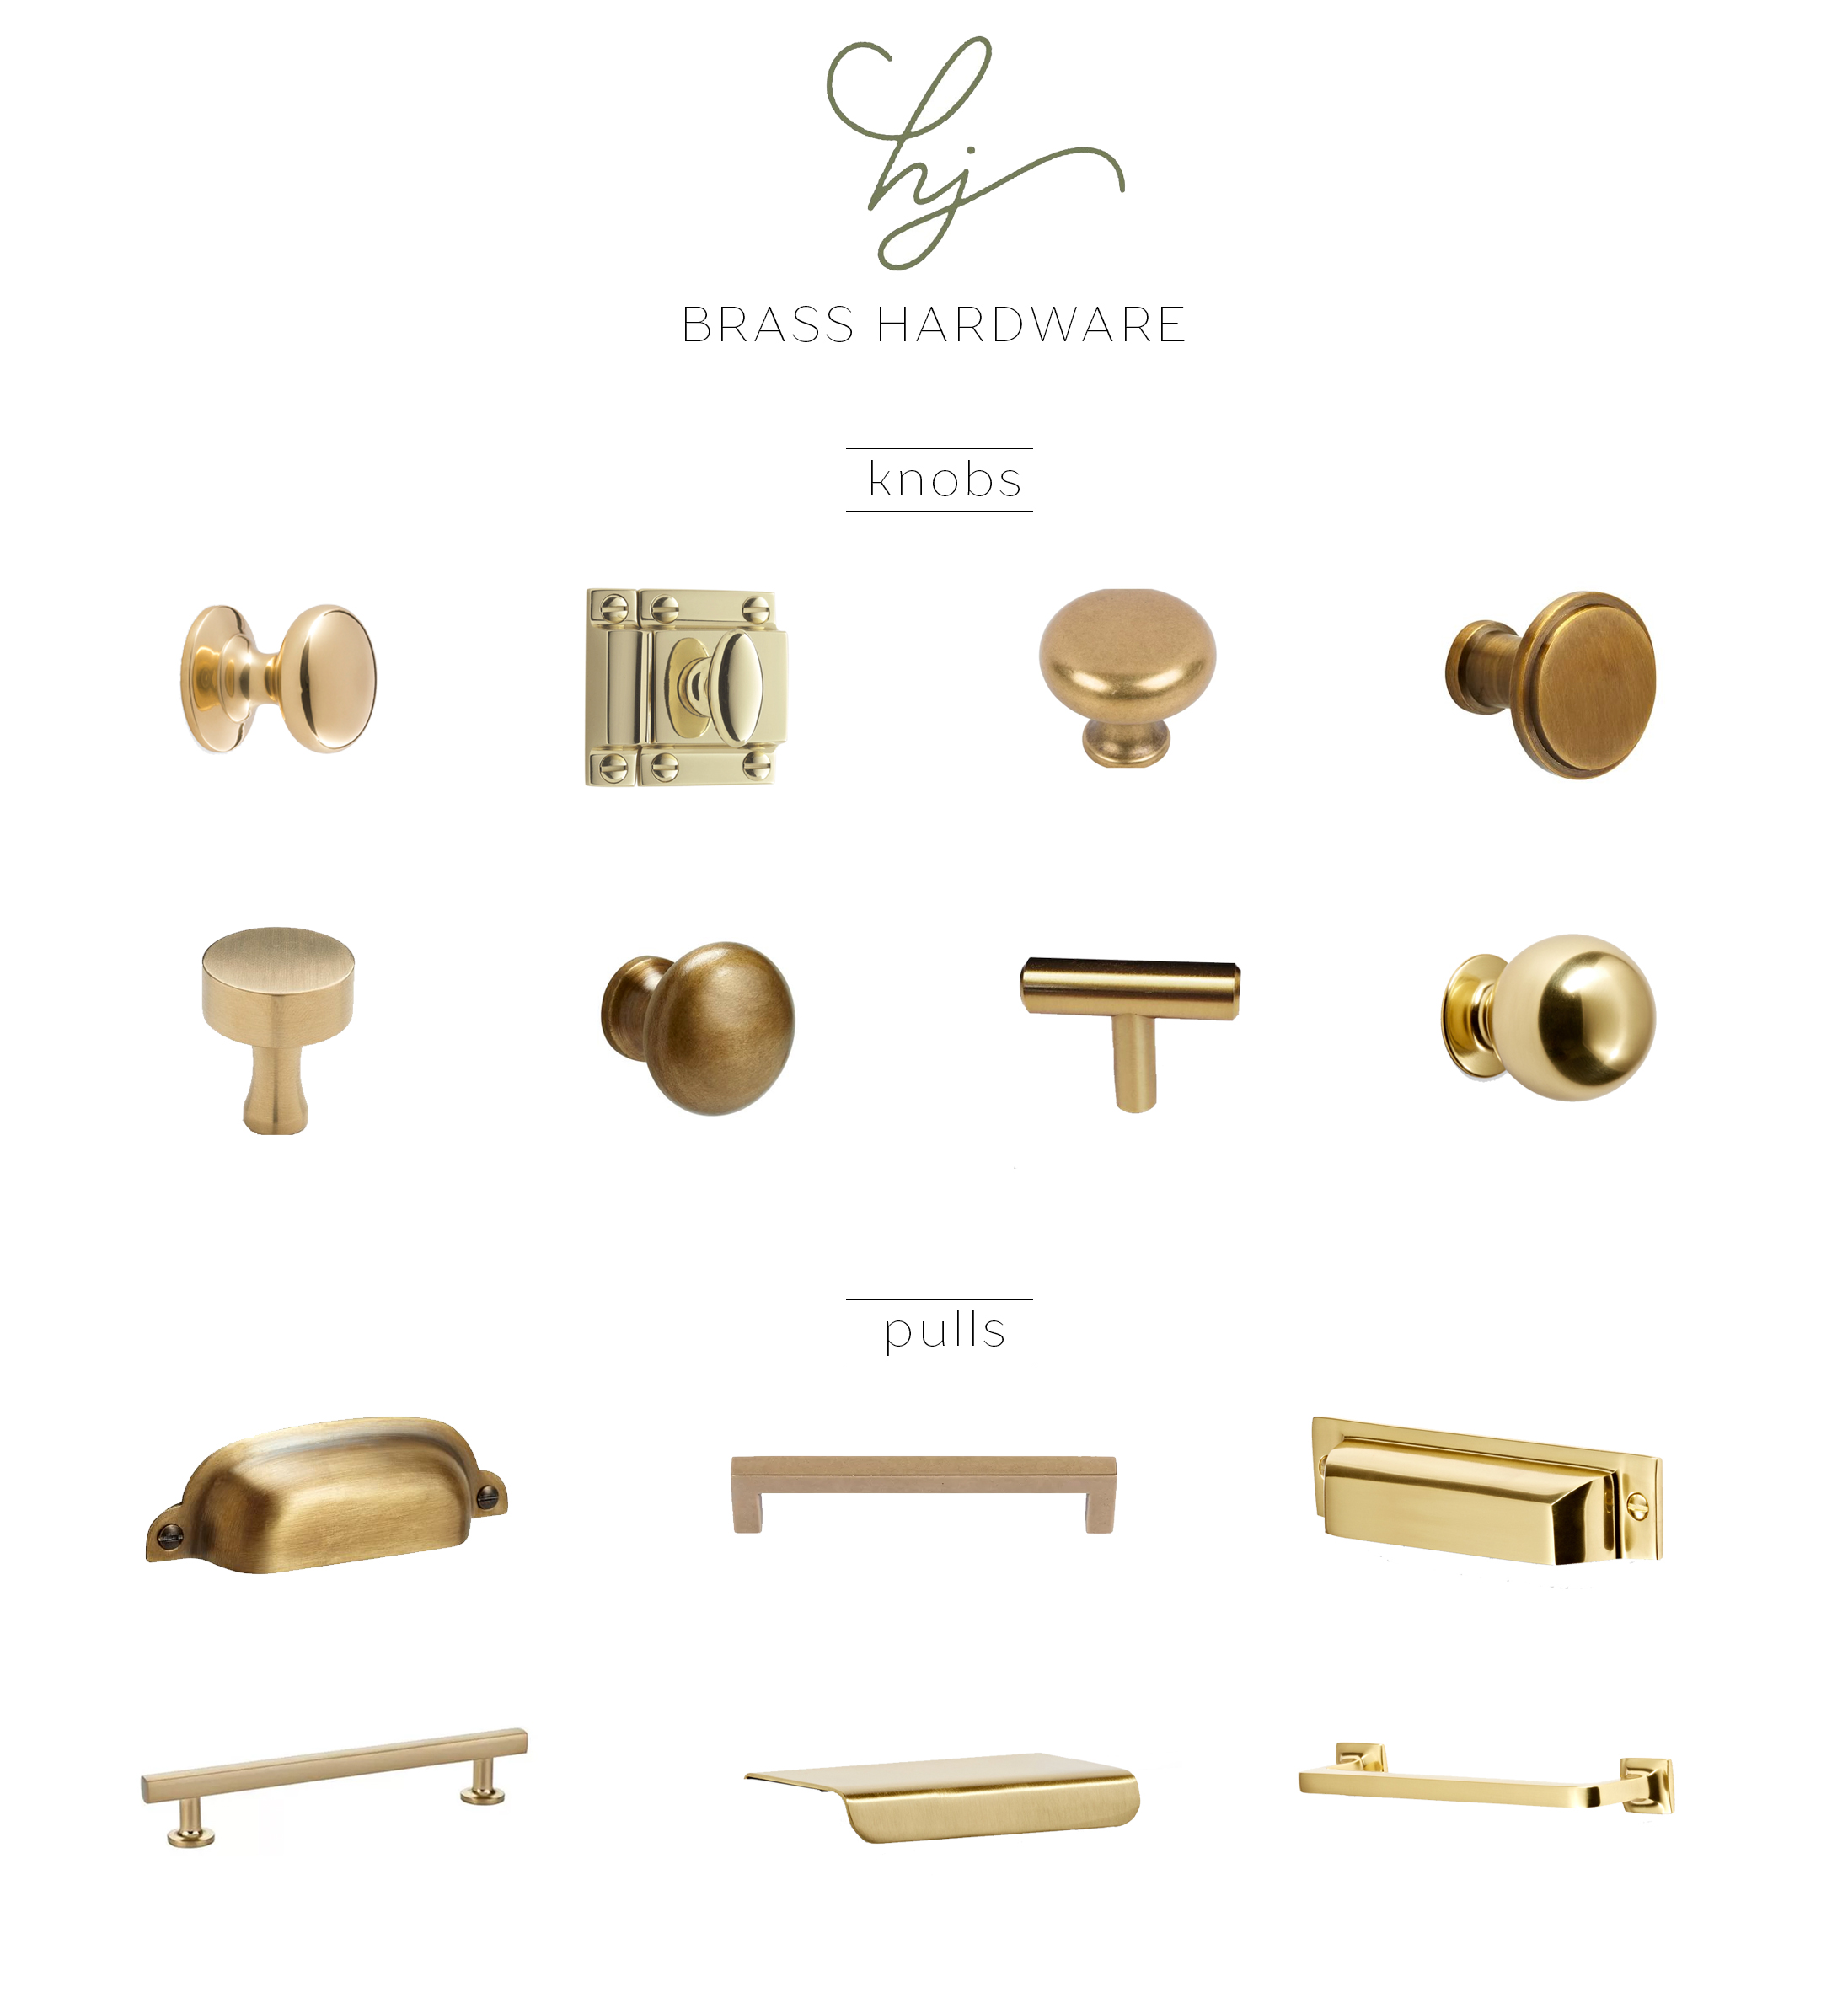 RIVERDALE BRASS  Cabinet Knobs, Handles and Pulls